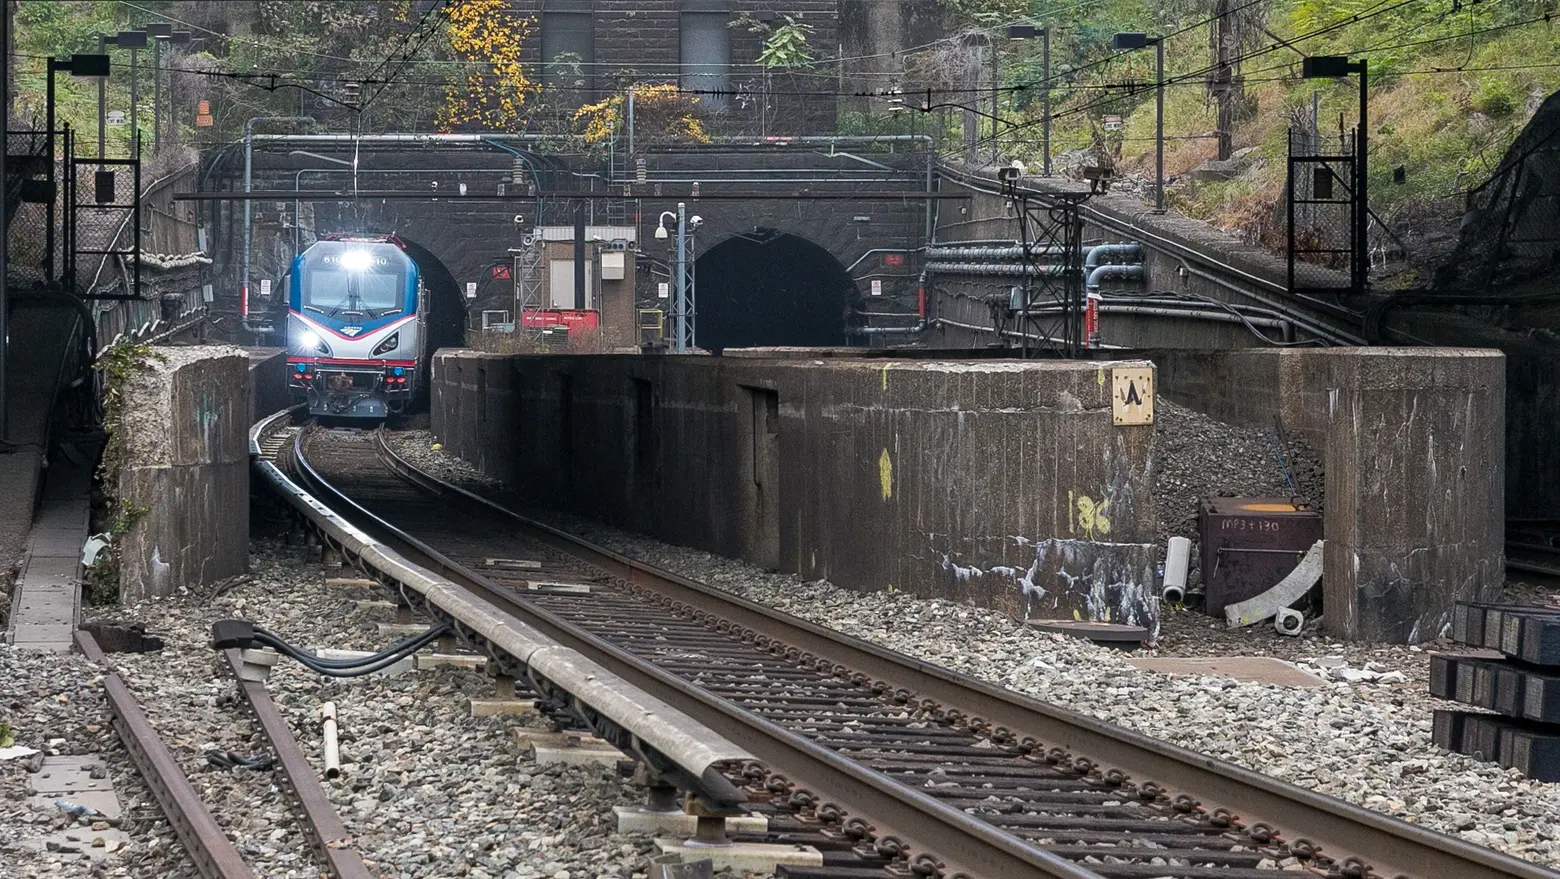 NY and NJ commit $5B to the Hudson River tunnel project, but still no word from Trump